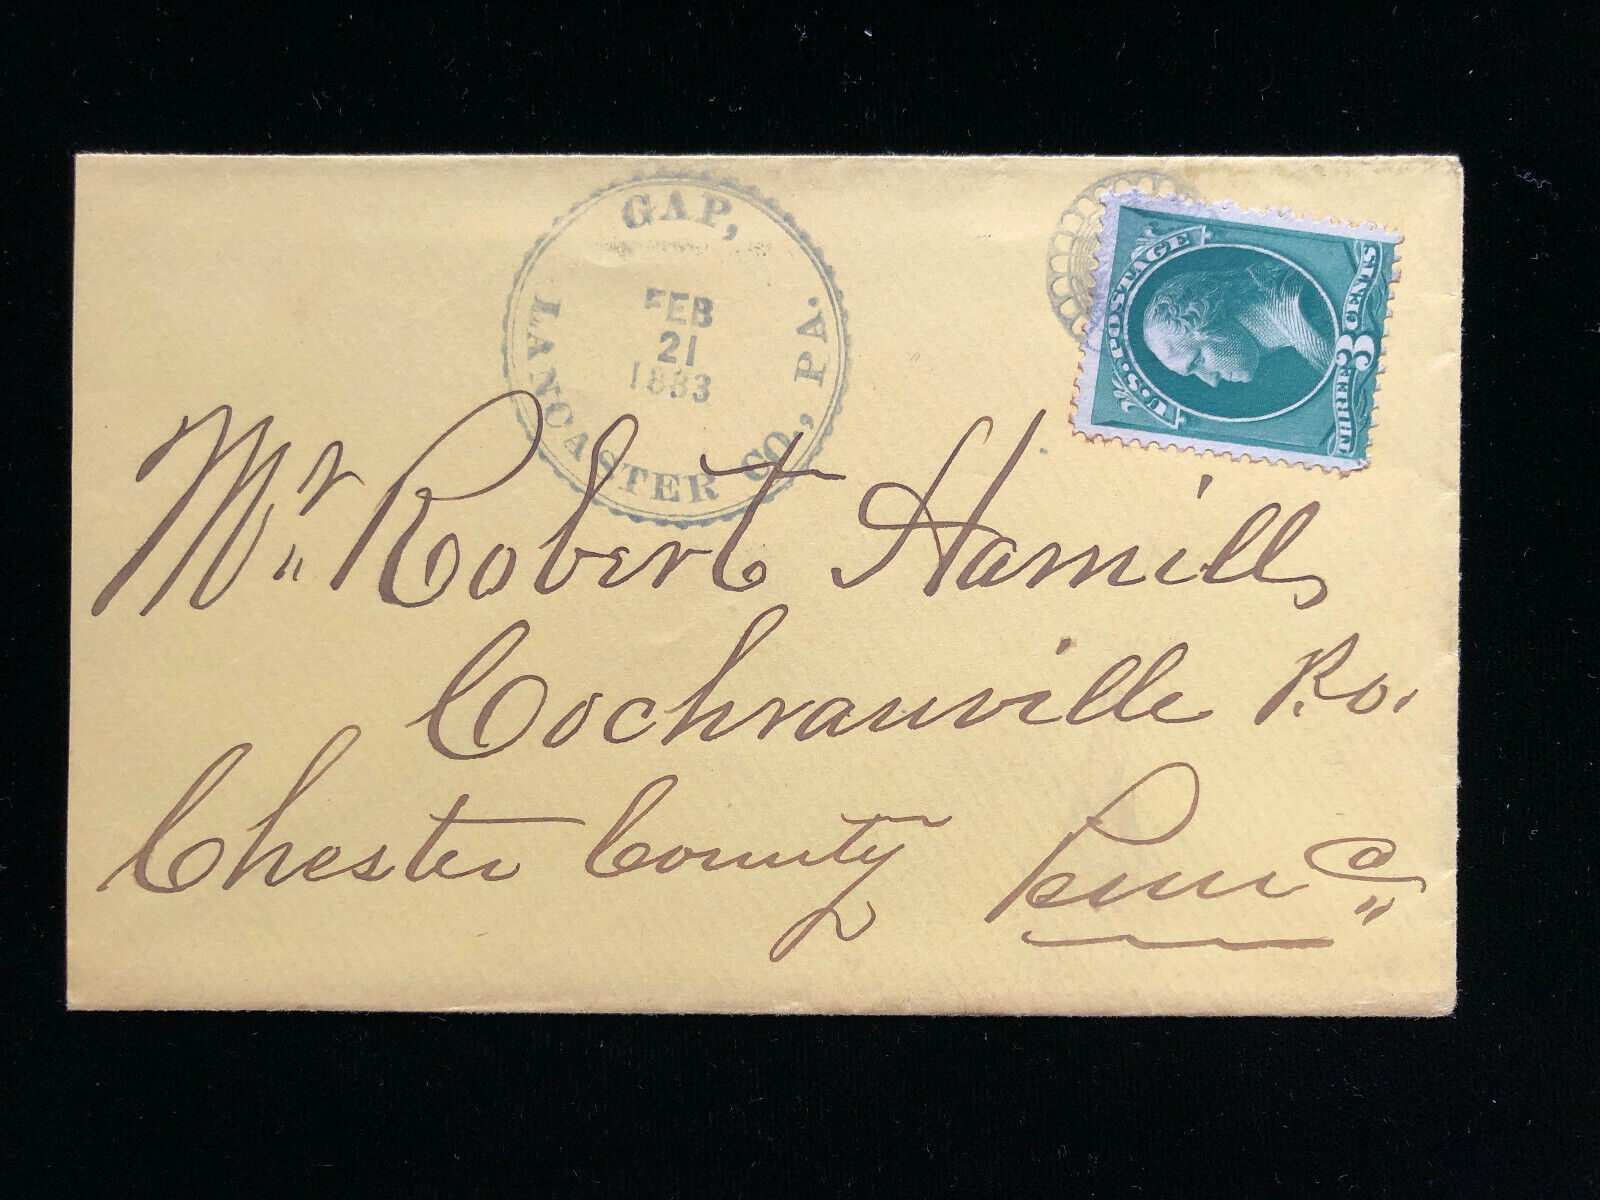 PA GAP LANCASTER CO. 1883 COVER CANCEL Max 81% OFF BANKNOTE FANCY WHEEL Max 81% OFF 3¢ O